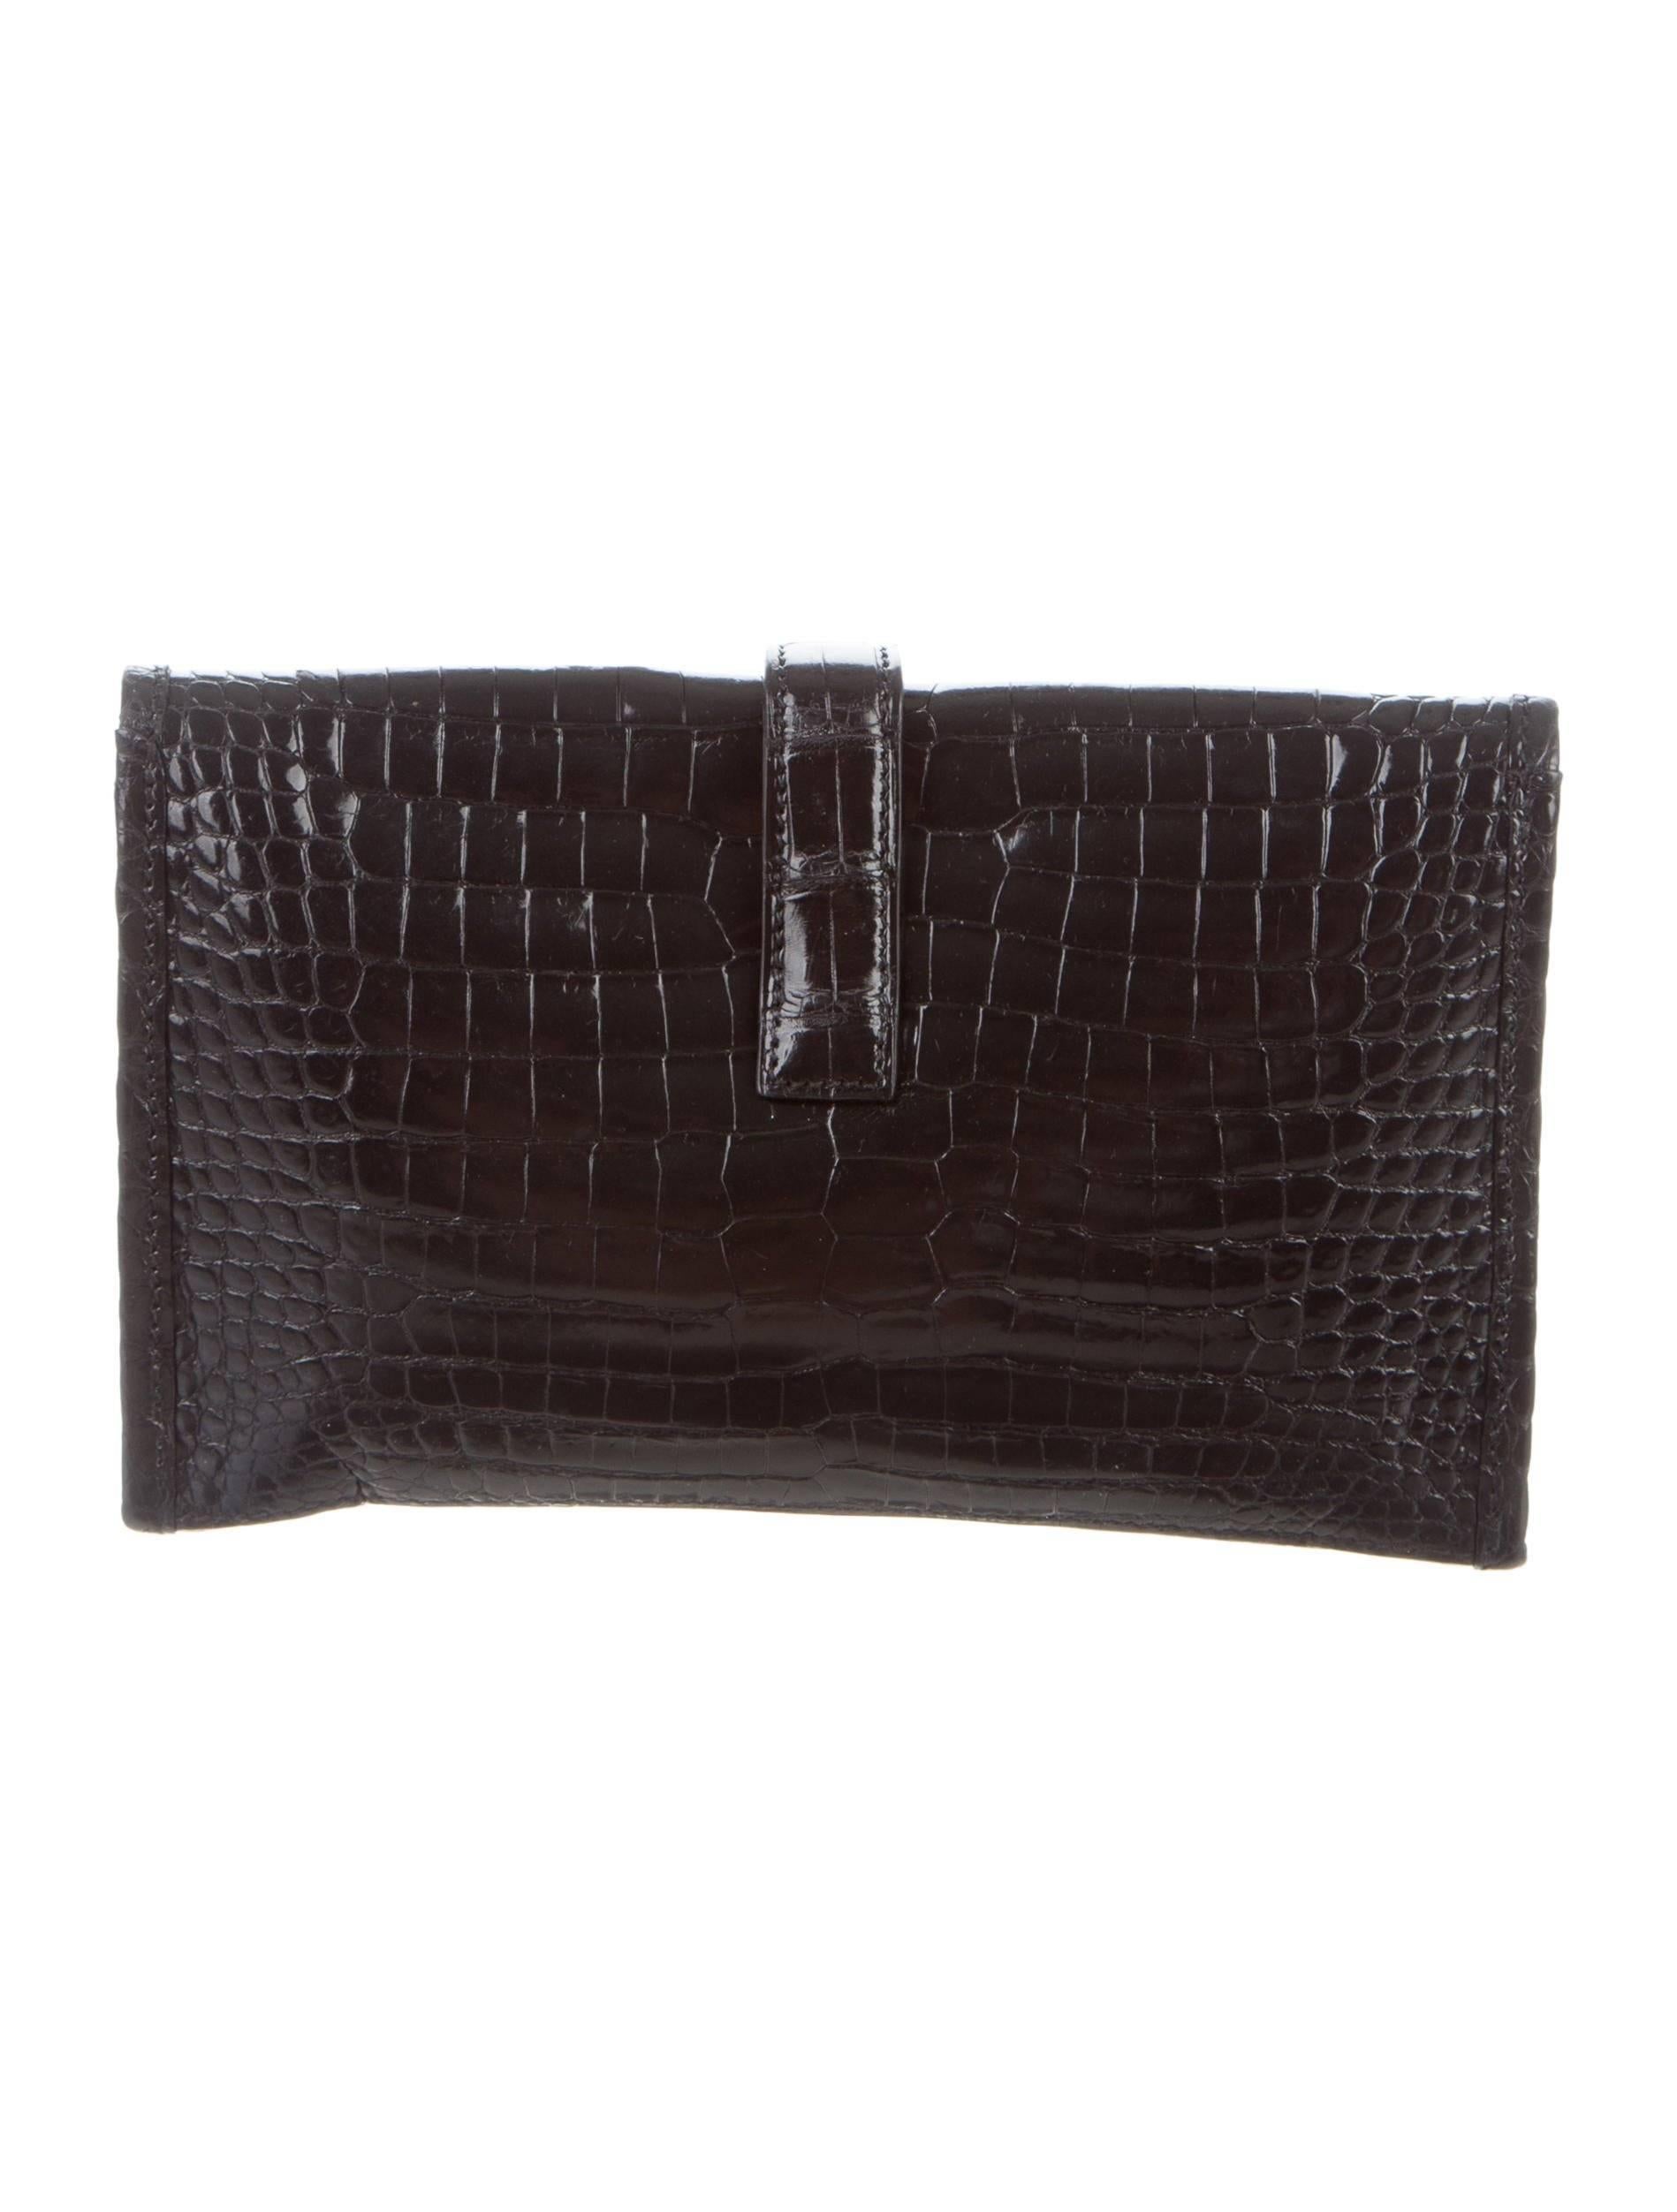 Hermes Limited Edition Black Crocodile H Small Envelope Evening Clutch Flap Bag

Crocodile 
Leather lining
Pull through closure
Made in France
Date code present Square H
Measures 8" W x 4.5" H x 0.5" D 